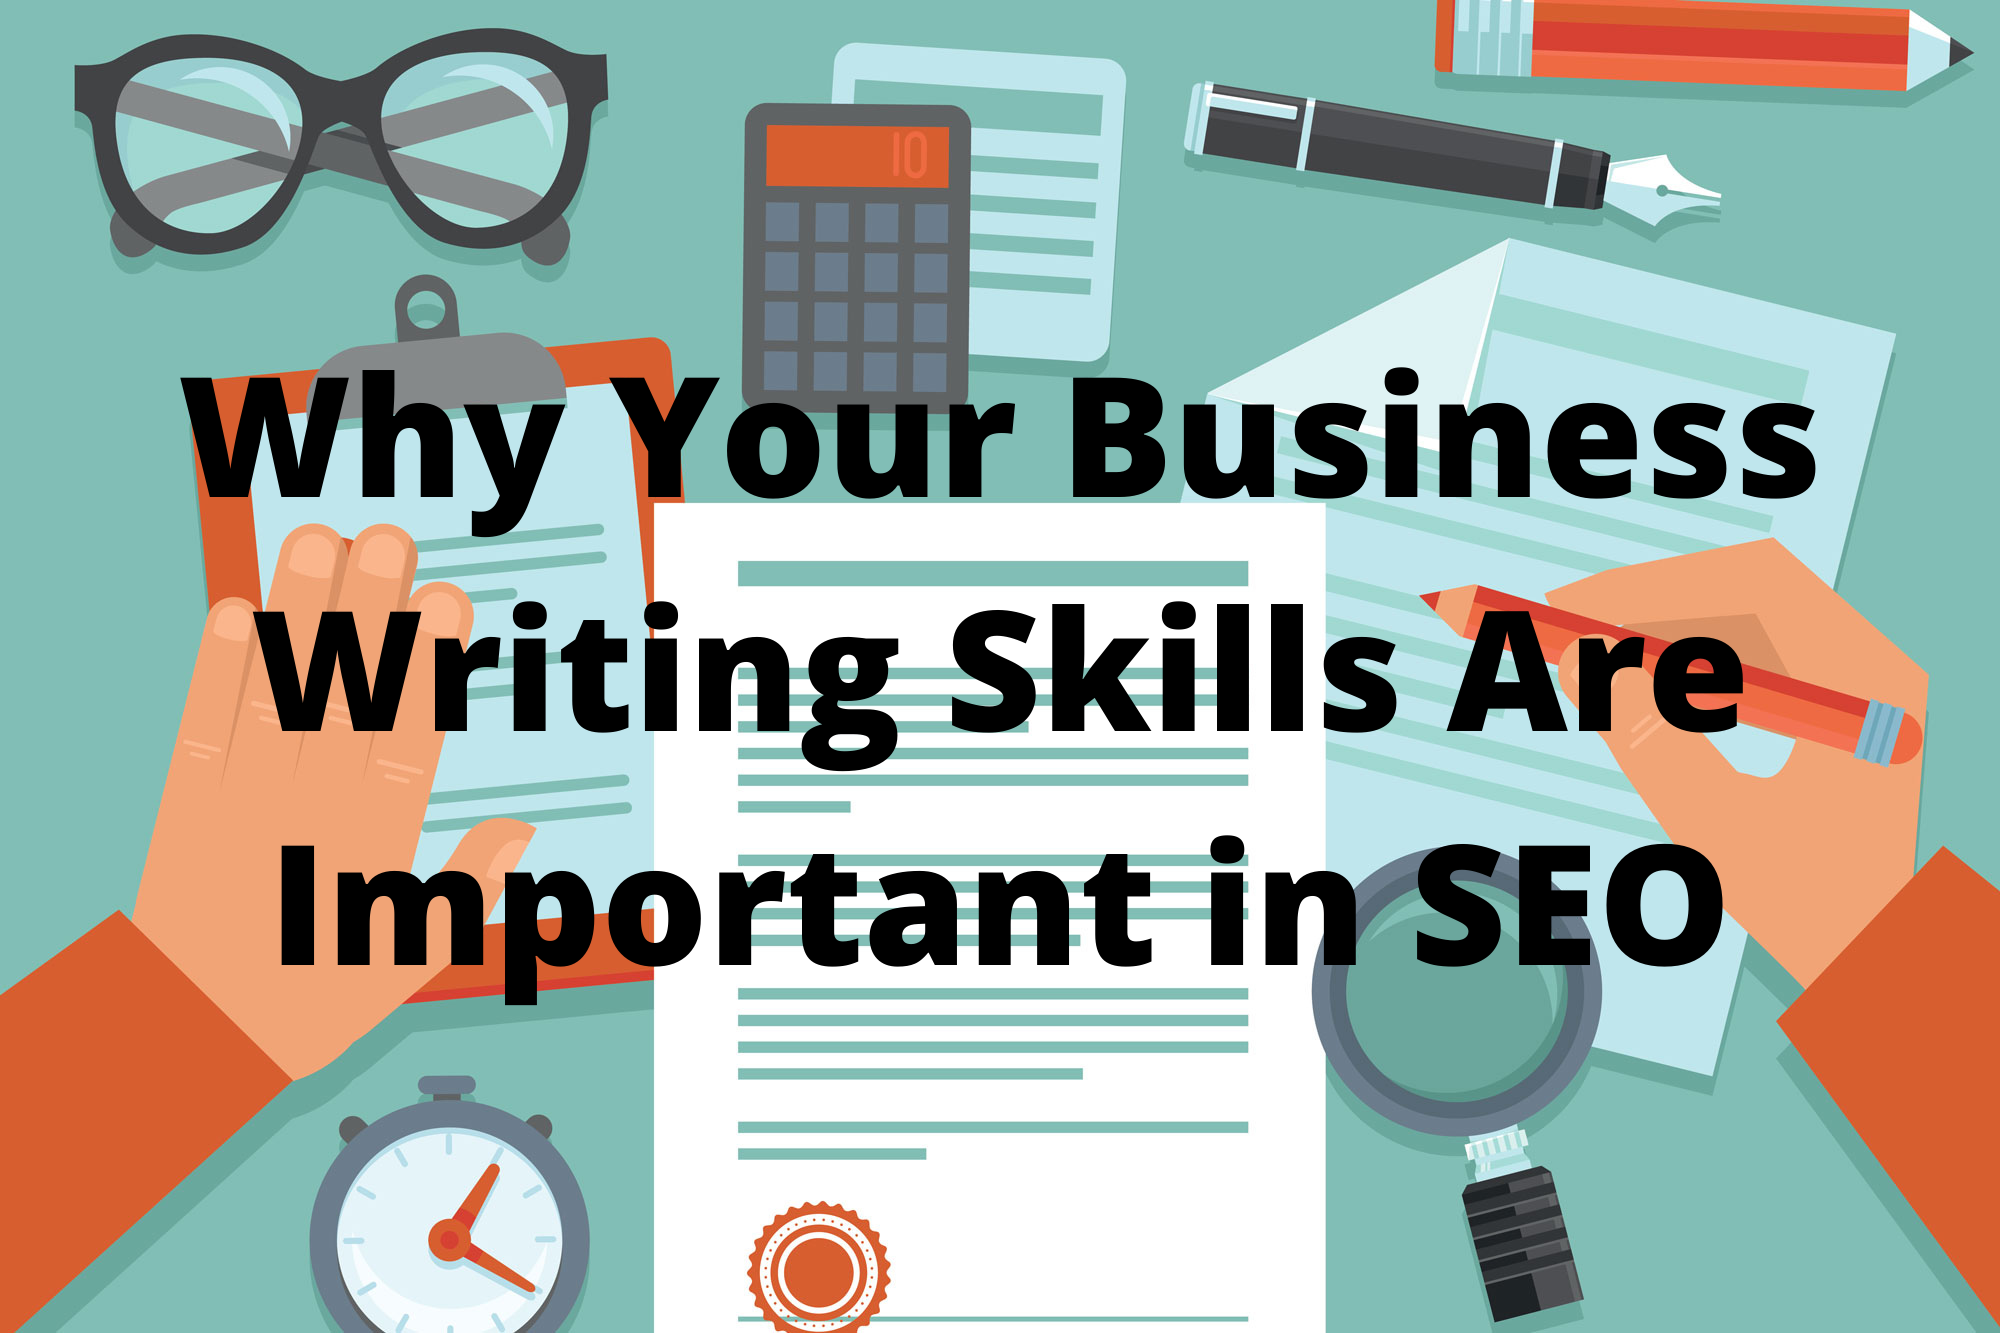 Why Your Business Writing Skills Are Important in SEO